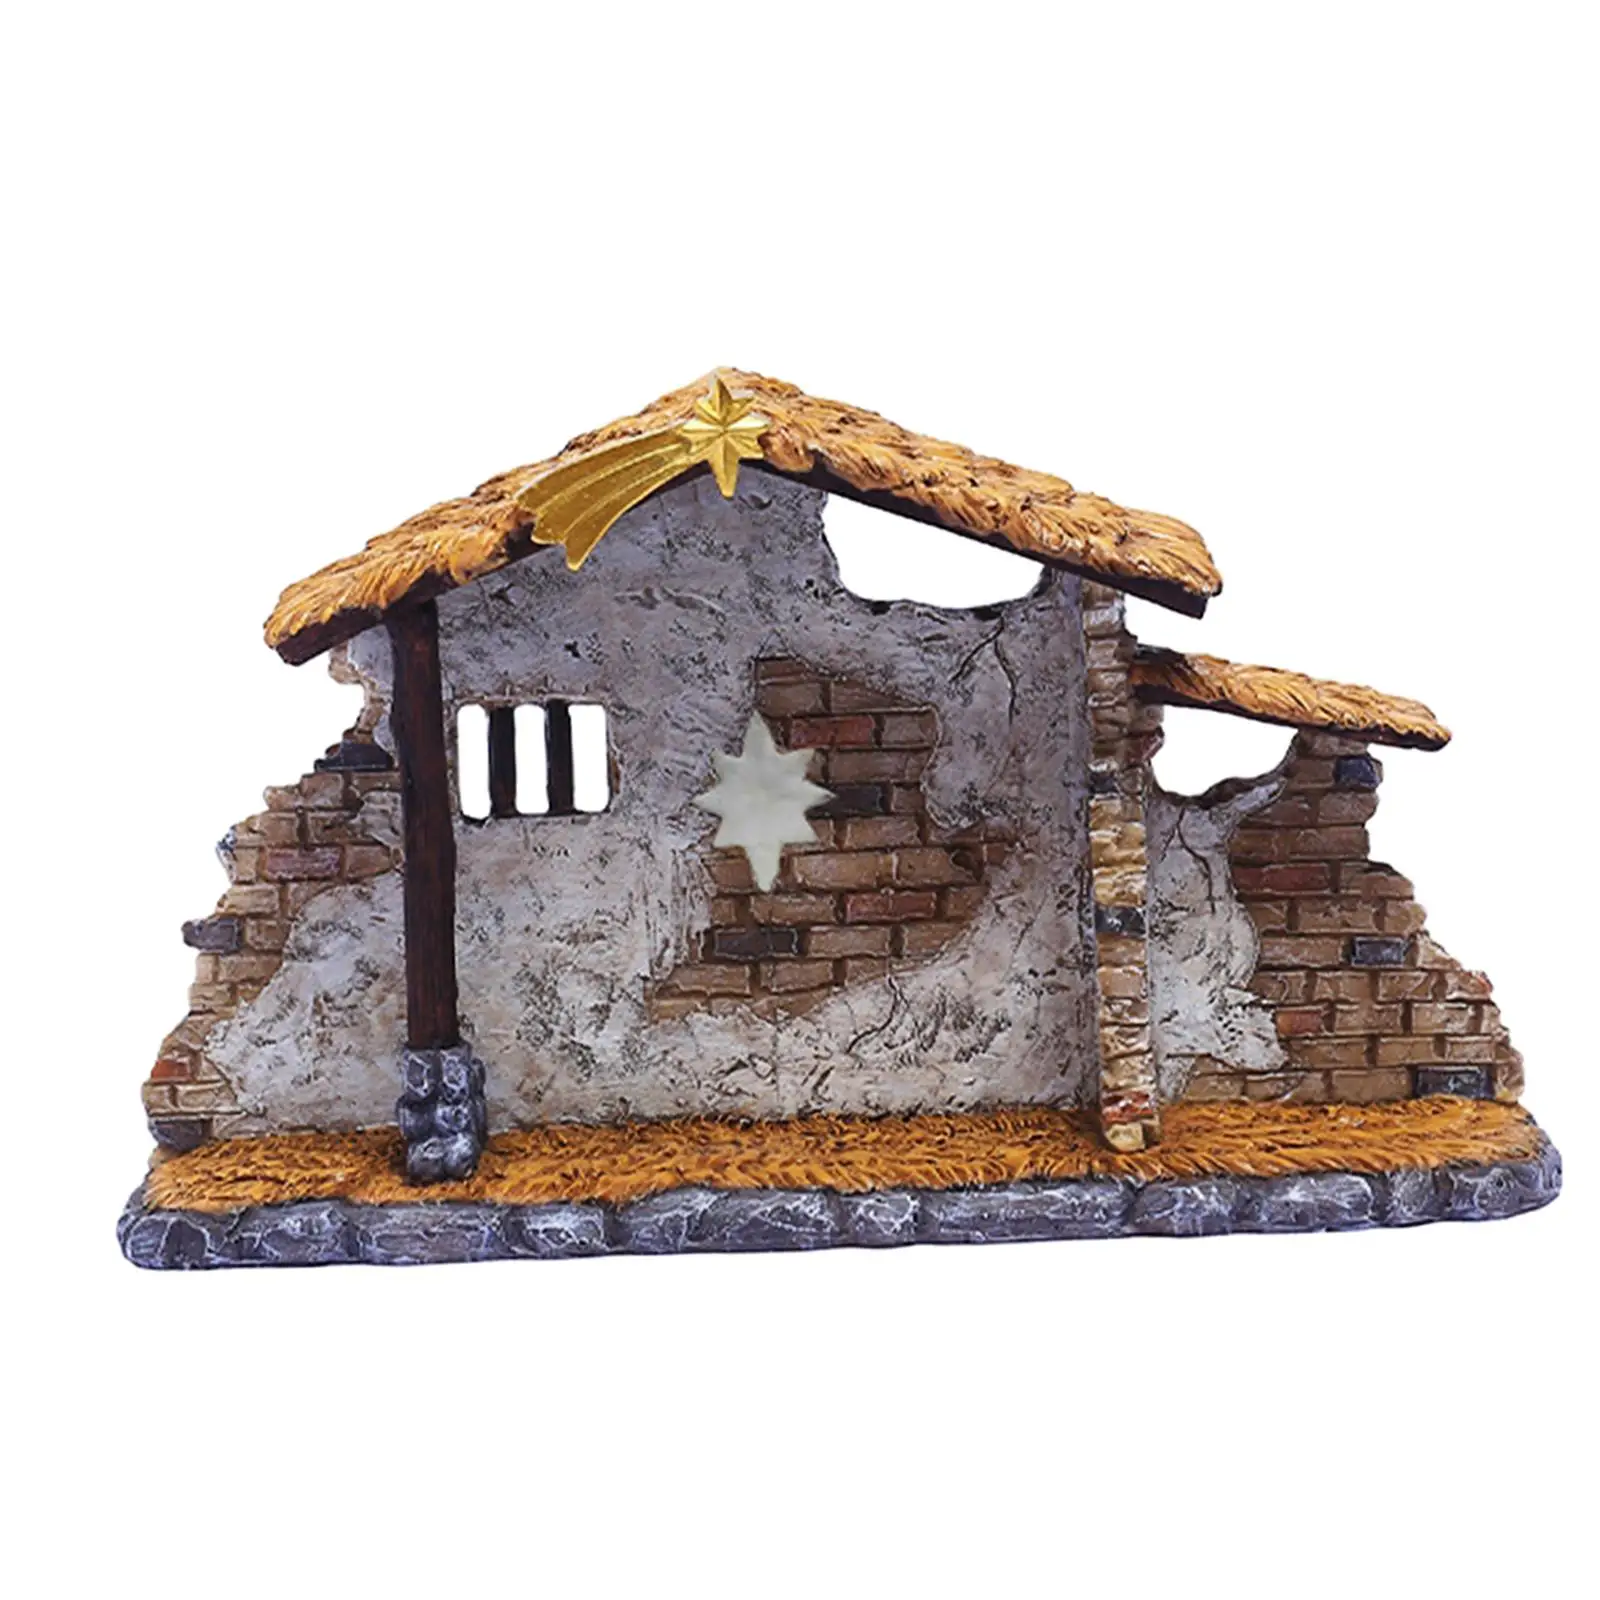 Traditional Nativity Shed Ornament Decorative Scene Crafts Resin for Christmas Decor Home Decor Gift Table Decorations Office